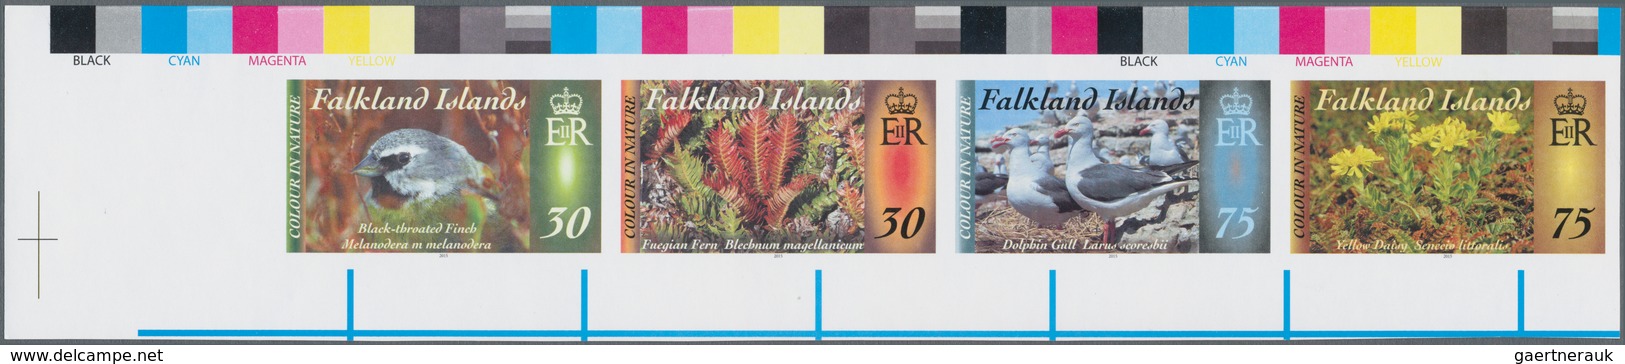 Falklandinseln: 2015, Colour In Nature, IMPERFORATE Proof Strip Of Four With Traffic Lights At Selve - Falkland Islands